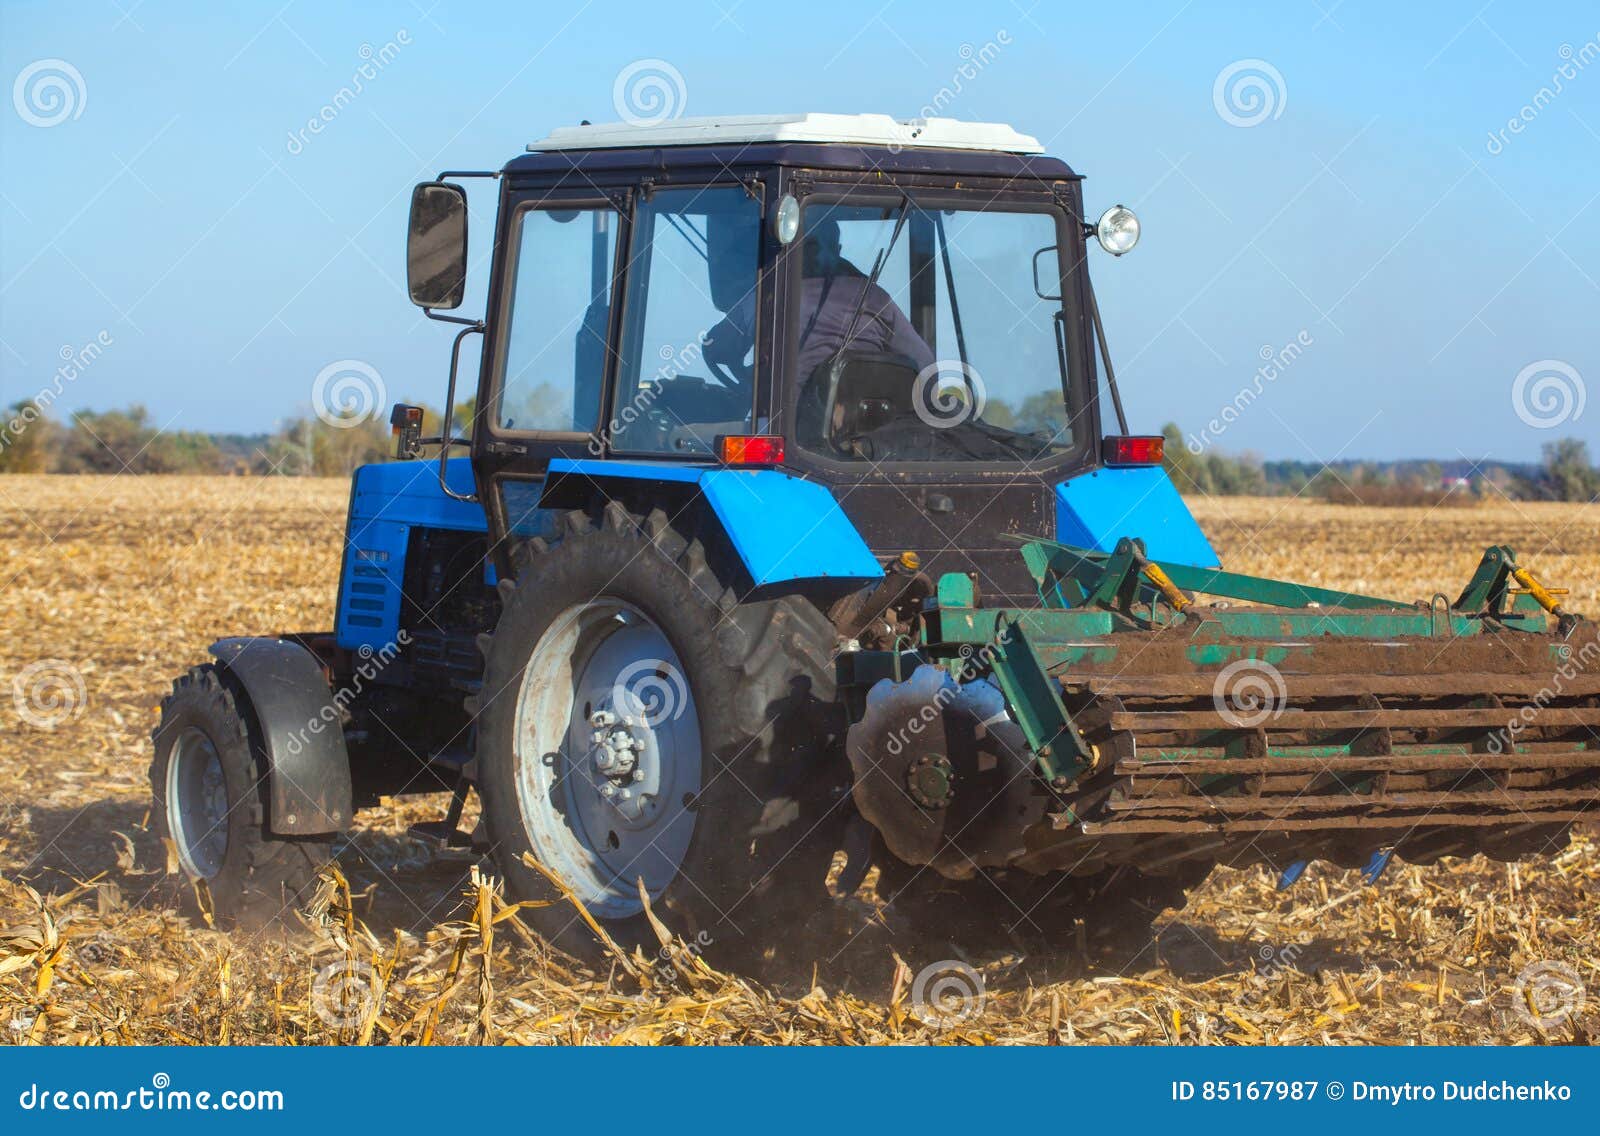 big blue tractor plows the field and removes the remains of previously mown corn.